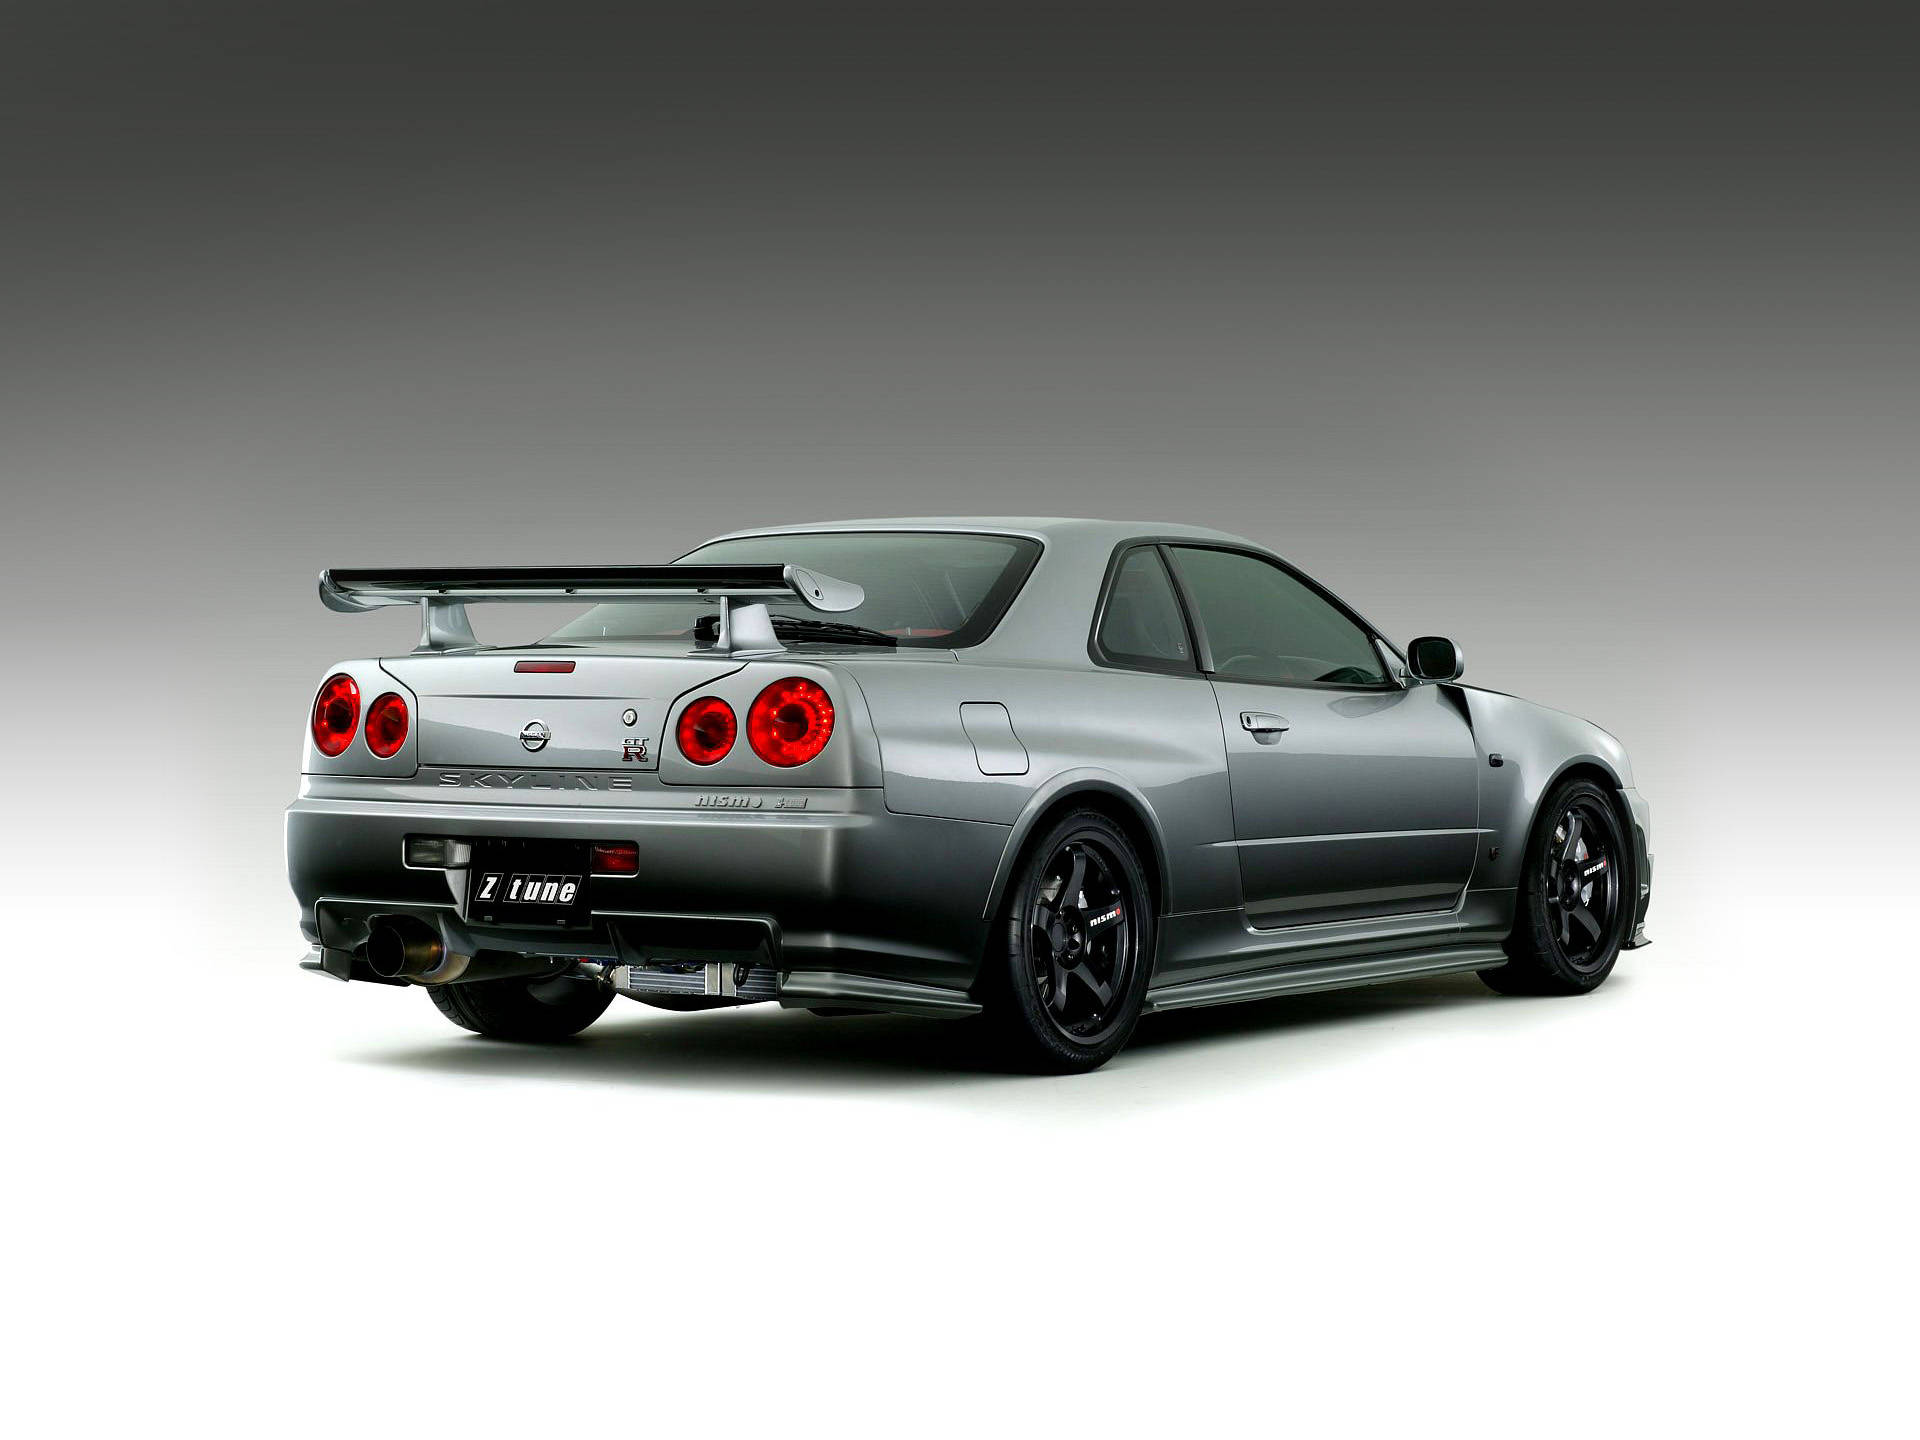 Back View Of Gray Skyline Car